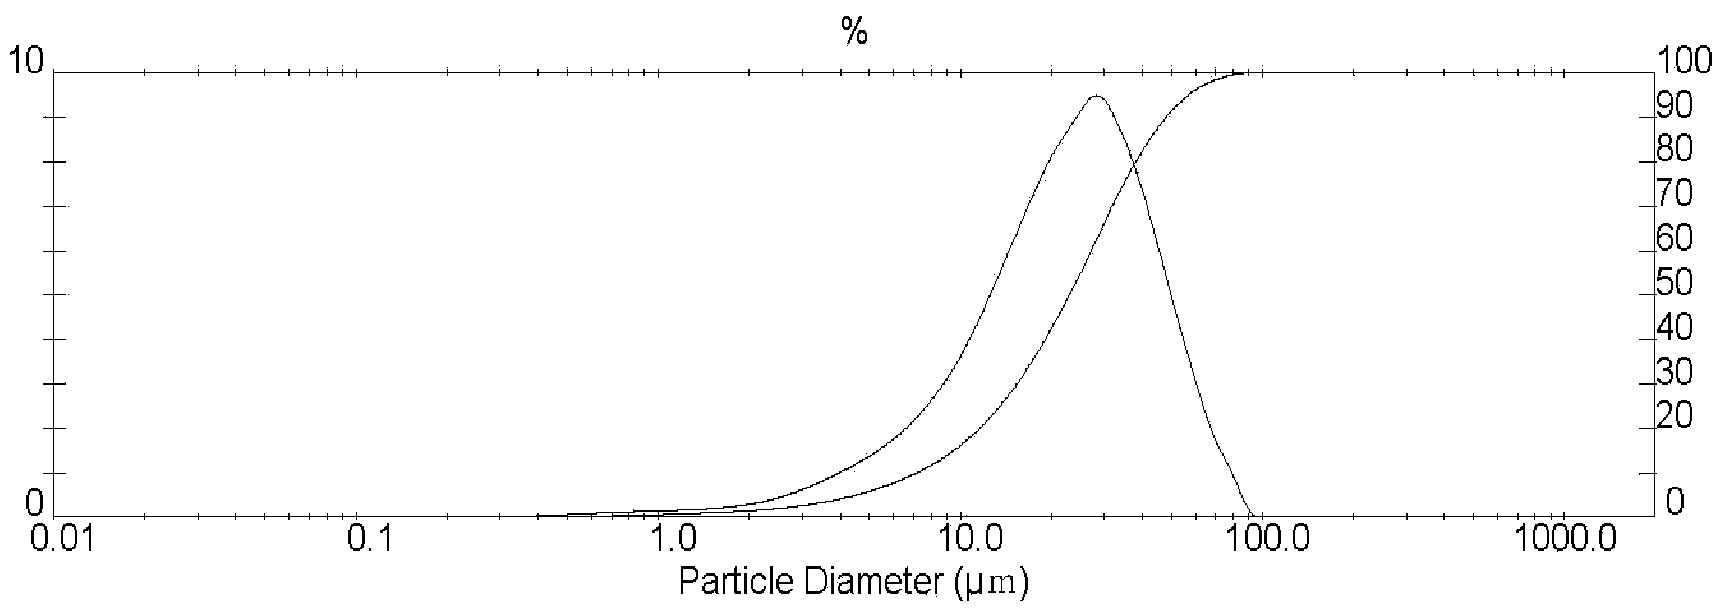 Process for continuously producing nickel hydroxide by using pickle liquor of nickel laterite ore